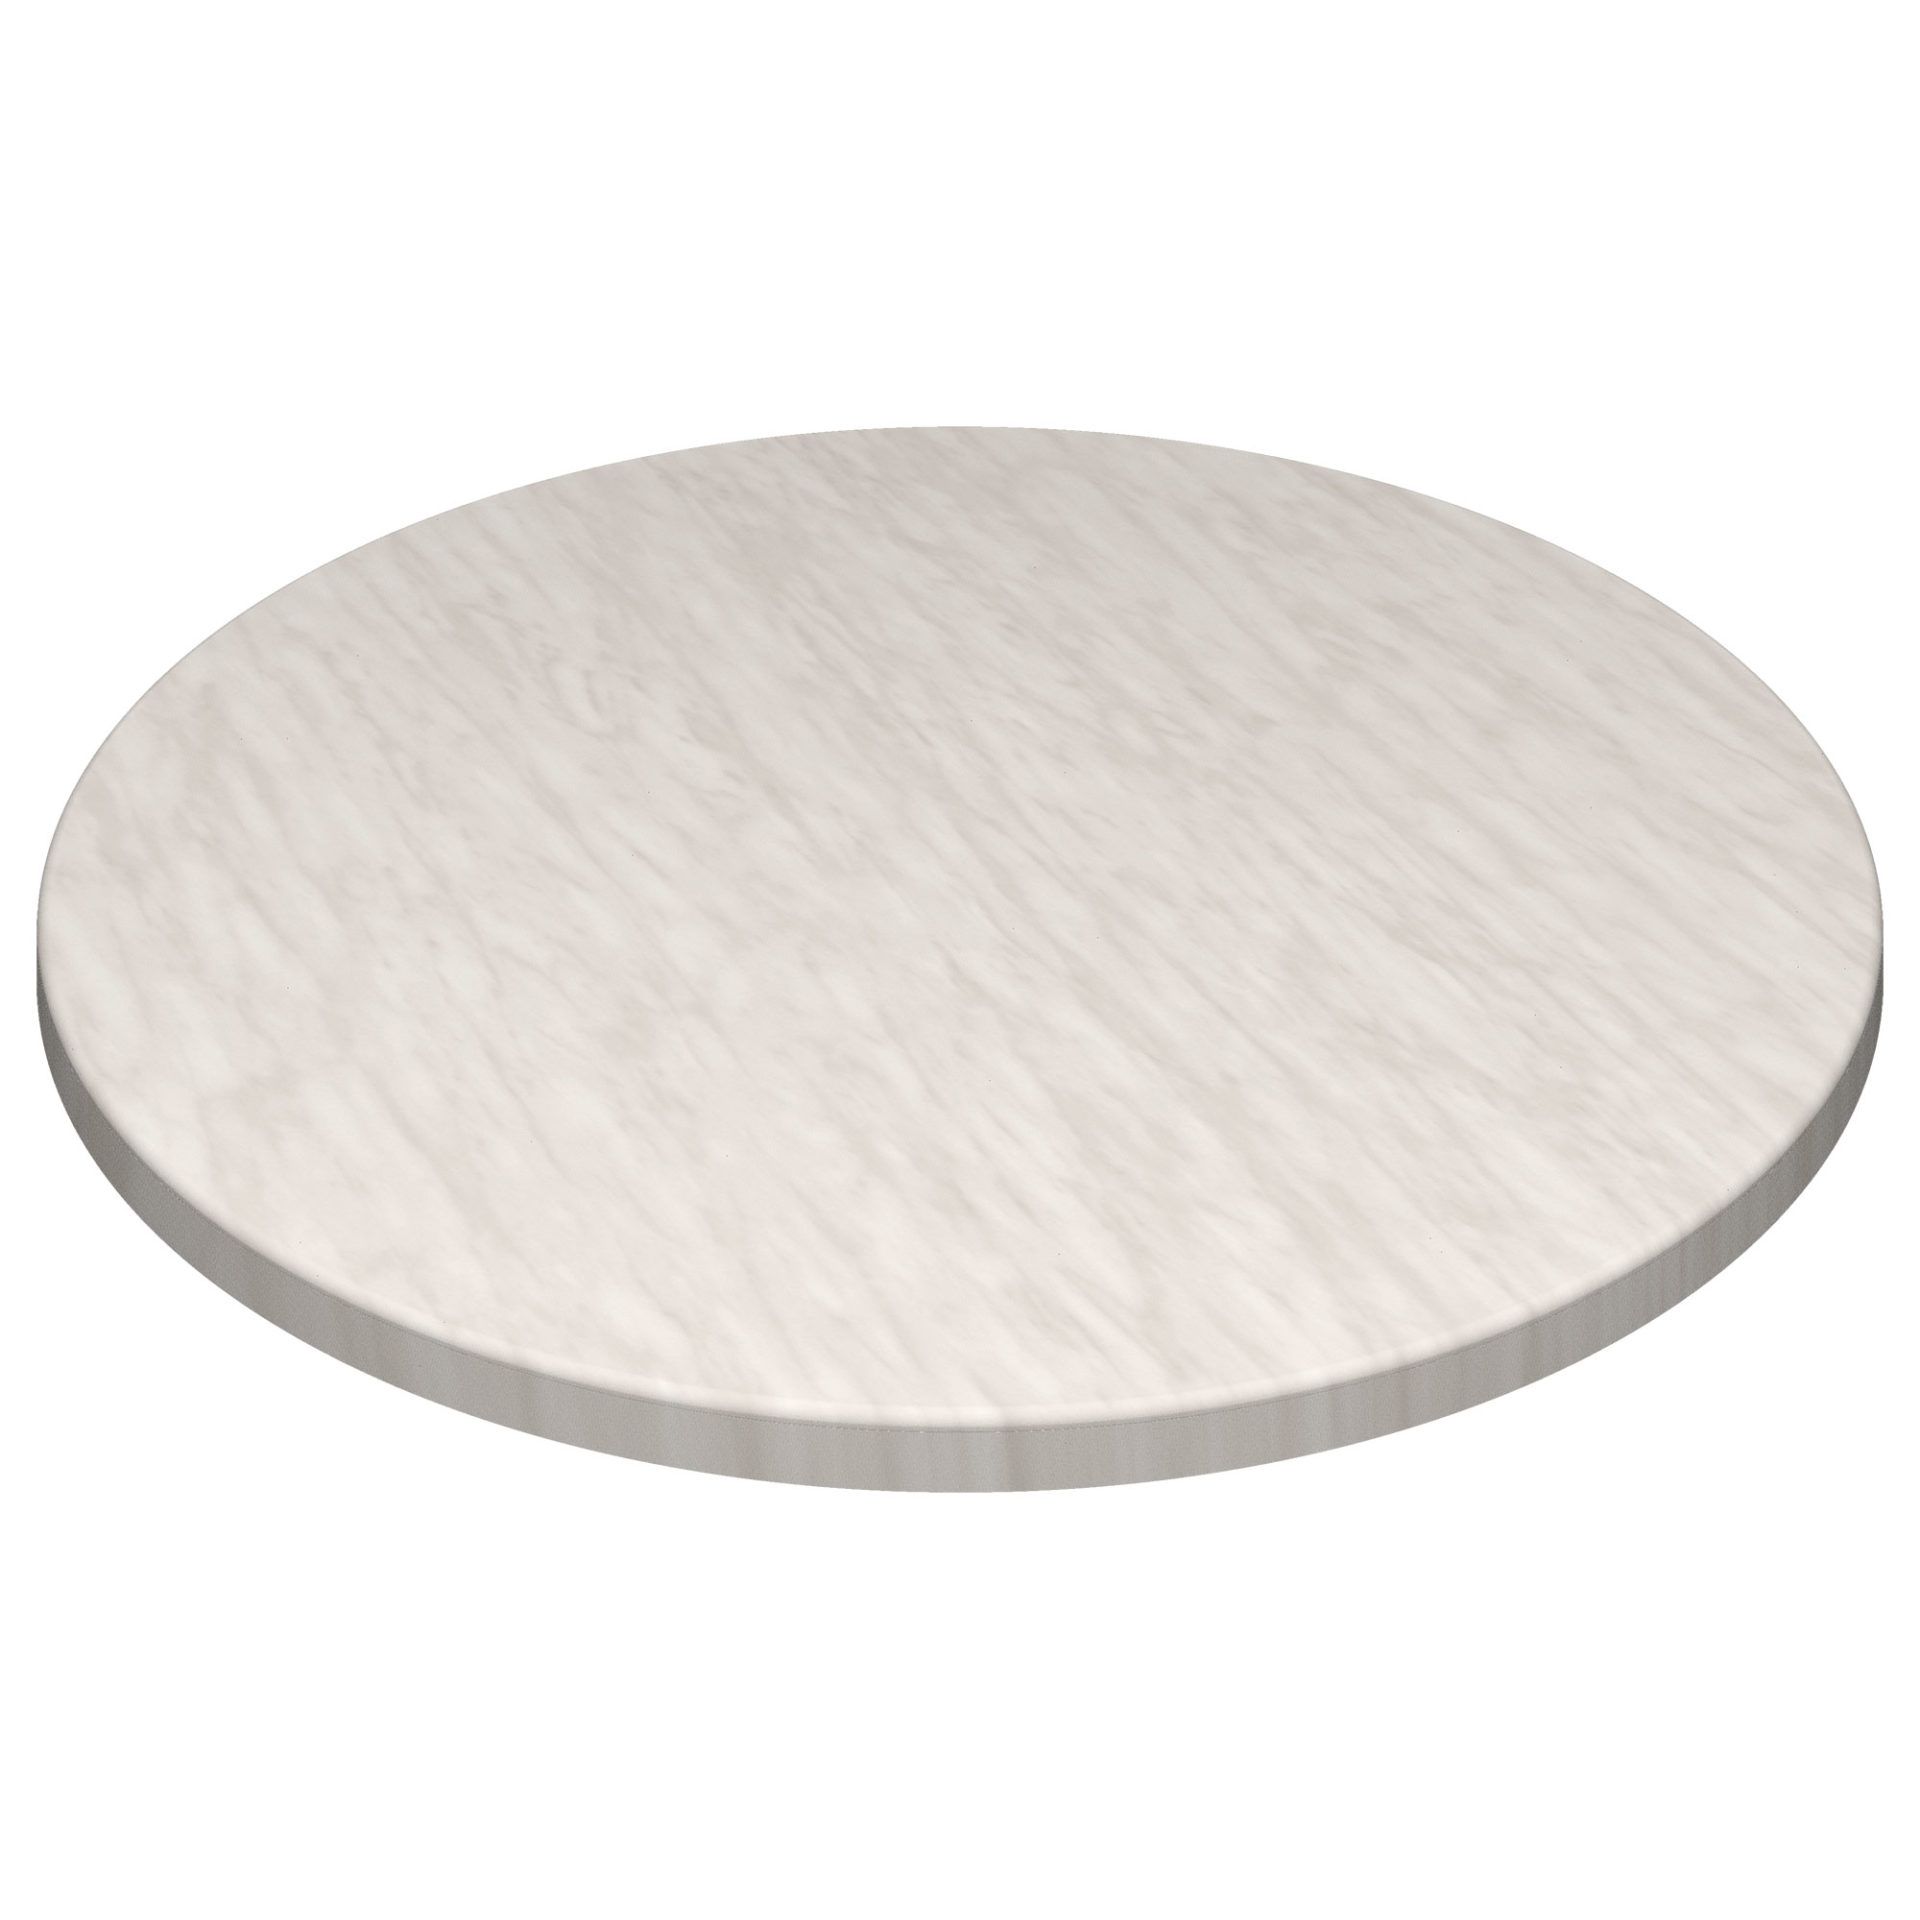 Werzalit Marble 600mm Diameter Duratop by SM France